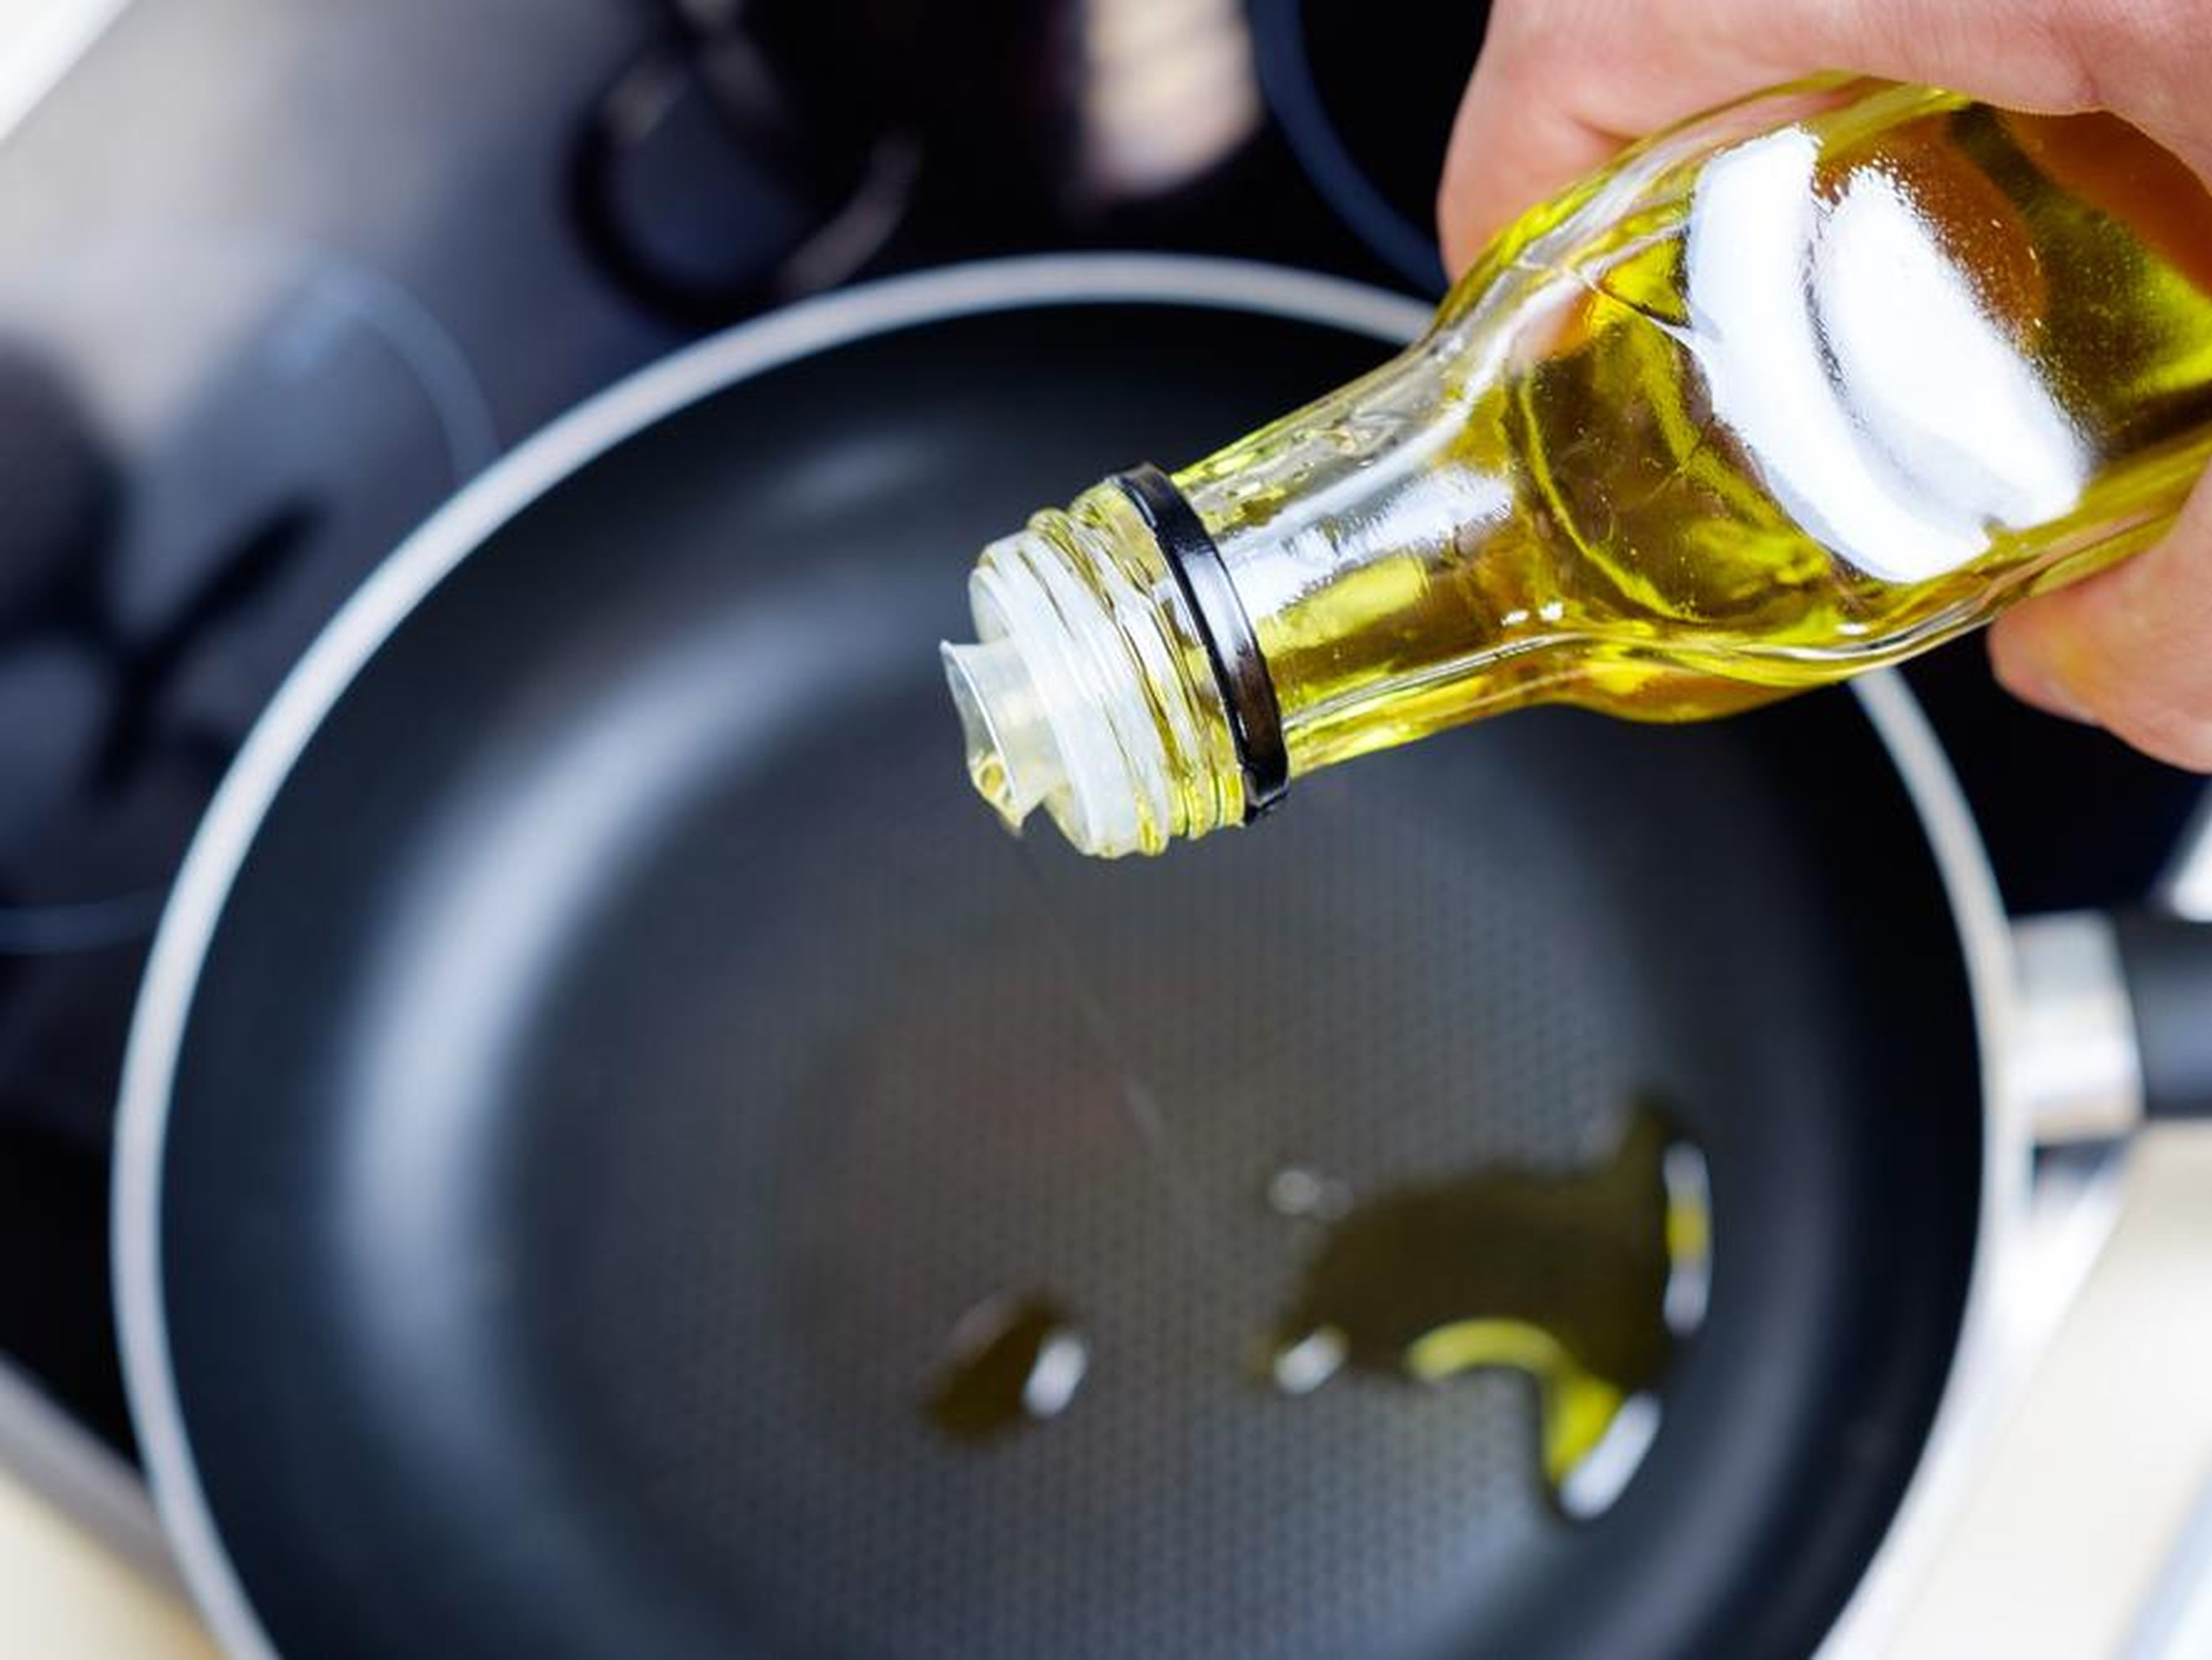 Your olive oil might be rotten.